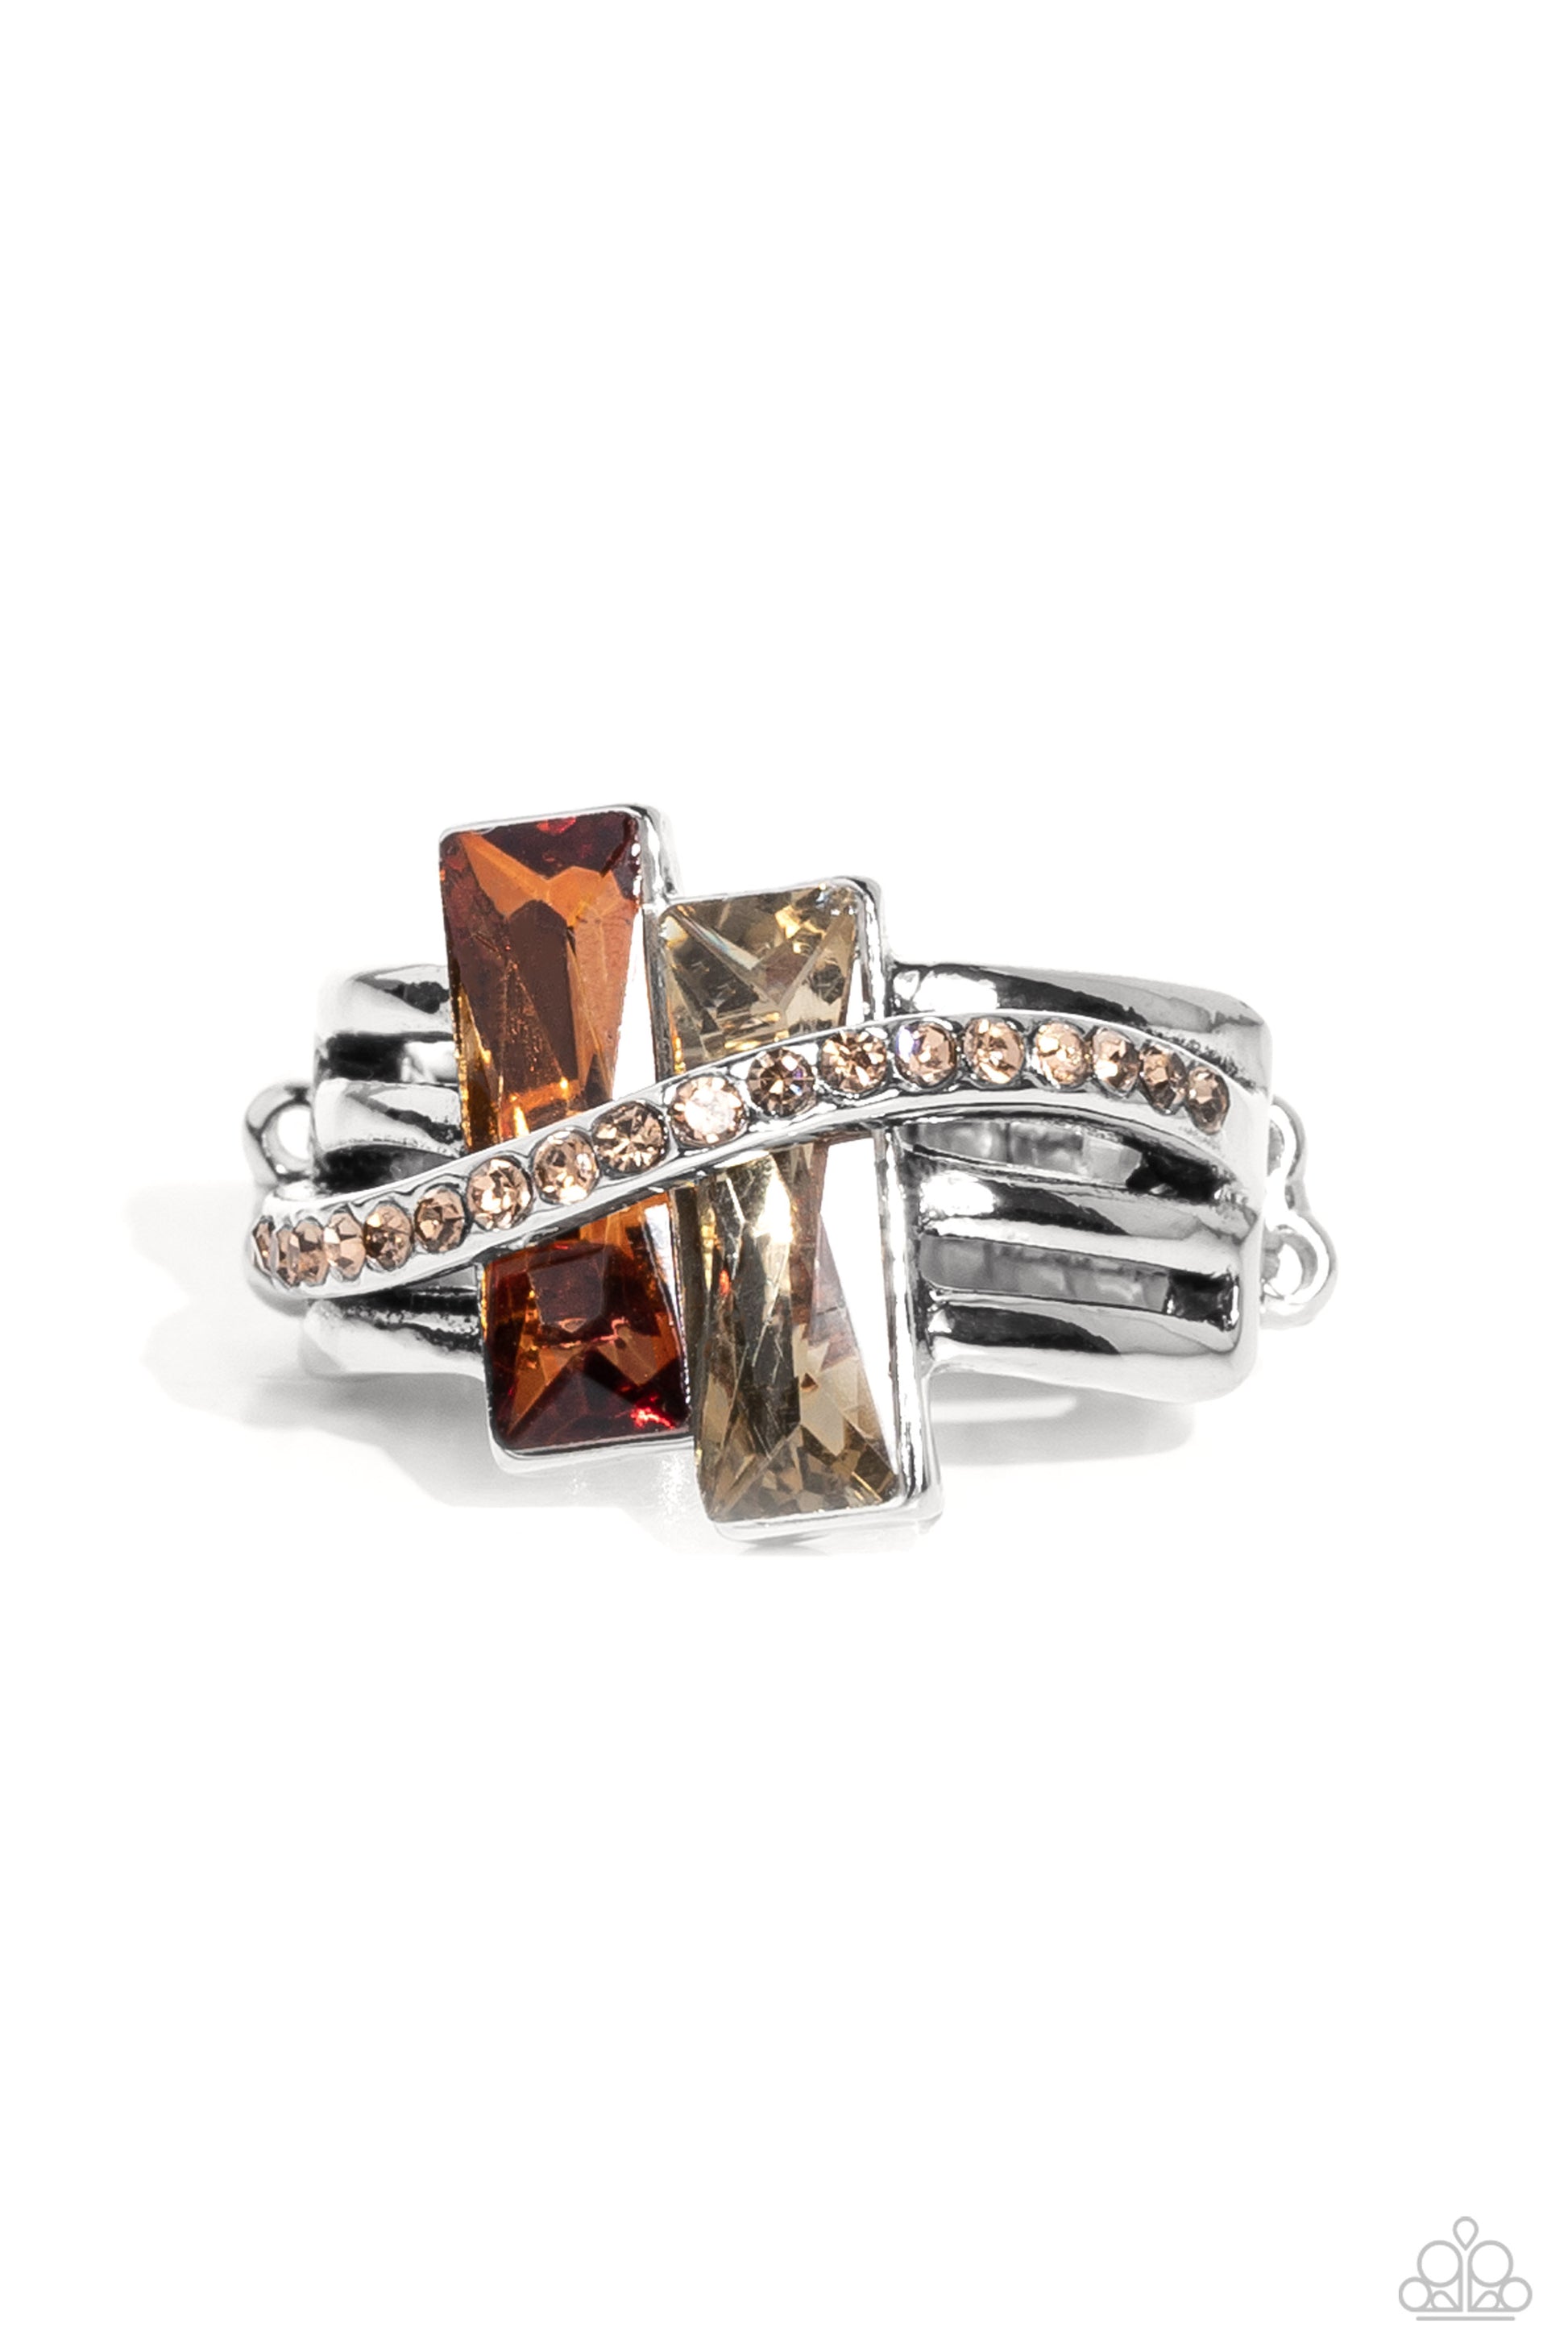 <p>Nestled in the center of three linear silver bars, two emerald-cut bars, one a glassy topaz gem, the other a glassy light-colored topaz gem, slant across the finger for a gritty display. A thin bar of silver, encrusted with dainty light-colored topaz rhinestones, curves up and over the slanted emerald-cut bars for additional shimmer and structure atop the finger. Features a dainty stretchy band for a flexible fit.</p> <p><i> Sold as one individual ring.</i></p>